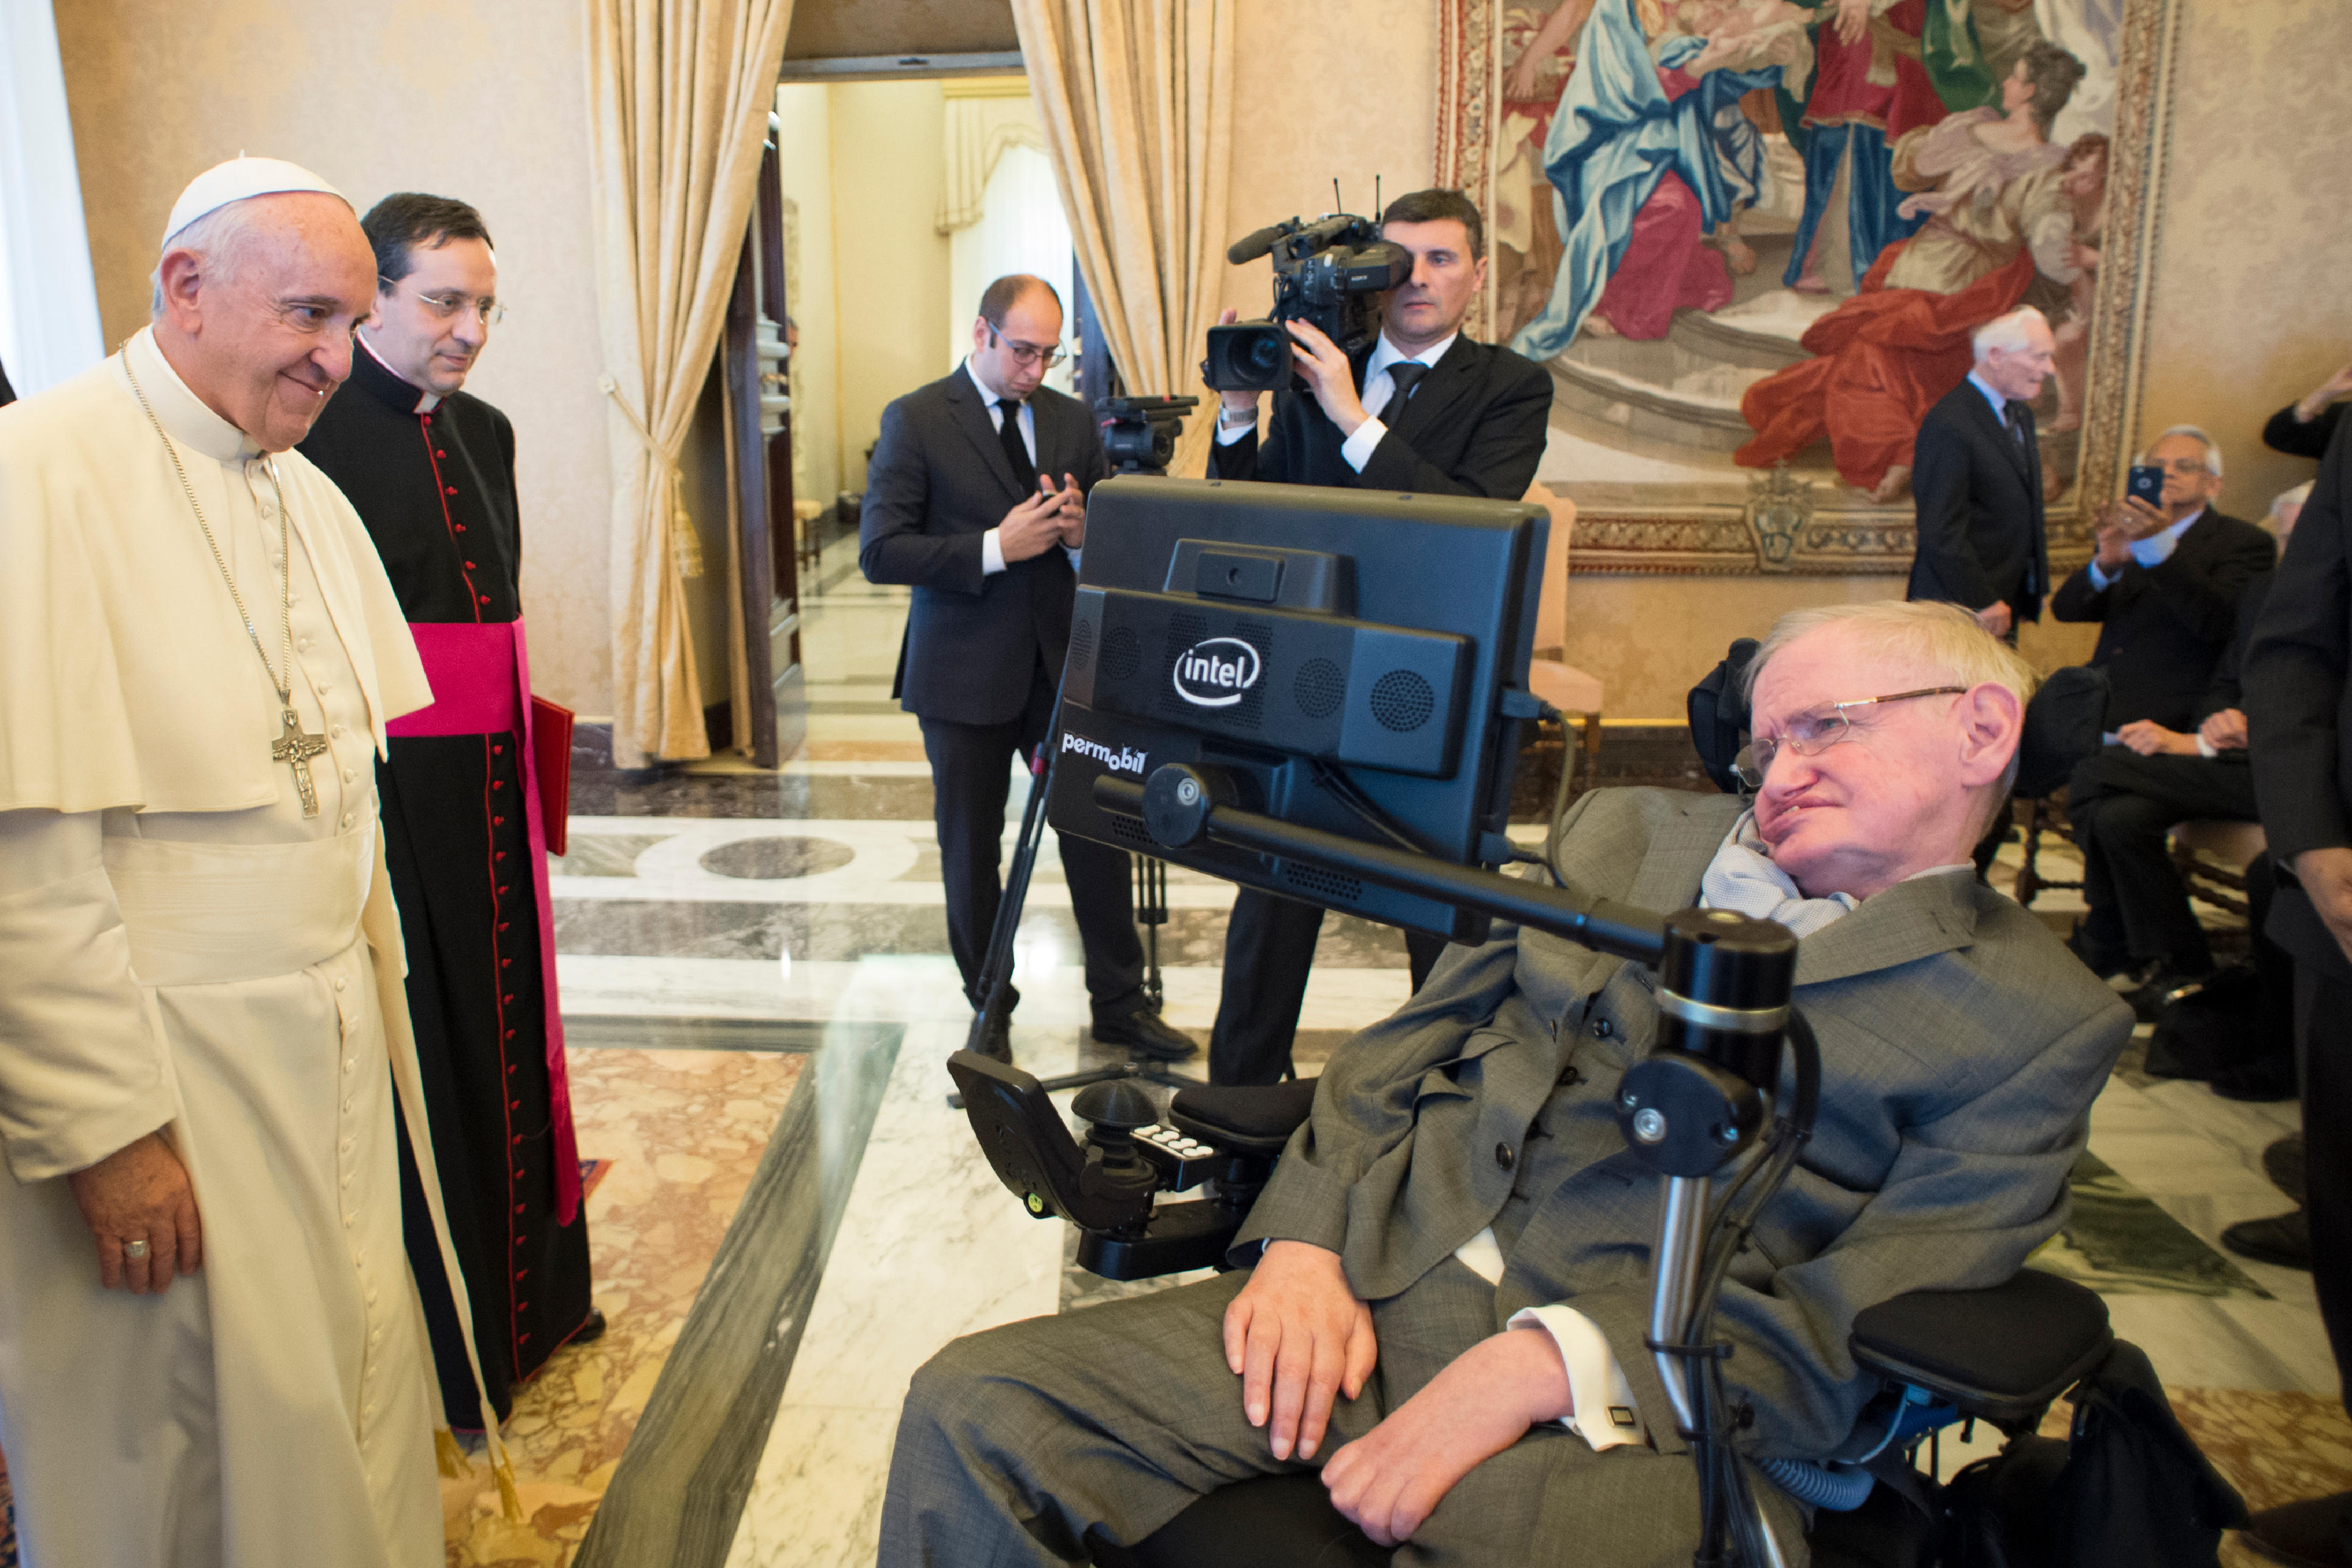 Pope Francis greets British theoretical physicist and cosmologist Stephen Hawking, during an audience with participants attending a plenary session of the Pontifical Academy of Sciences at the Vatican Nov. 28. (CNS photo/L'Osservatore Romano, handout) See POPE-SCIENCE and POPE-DRUGS Nov. 28, 2016.